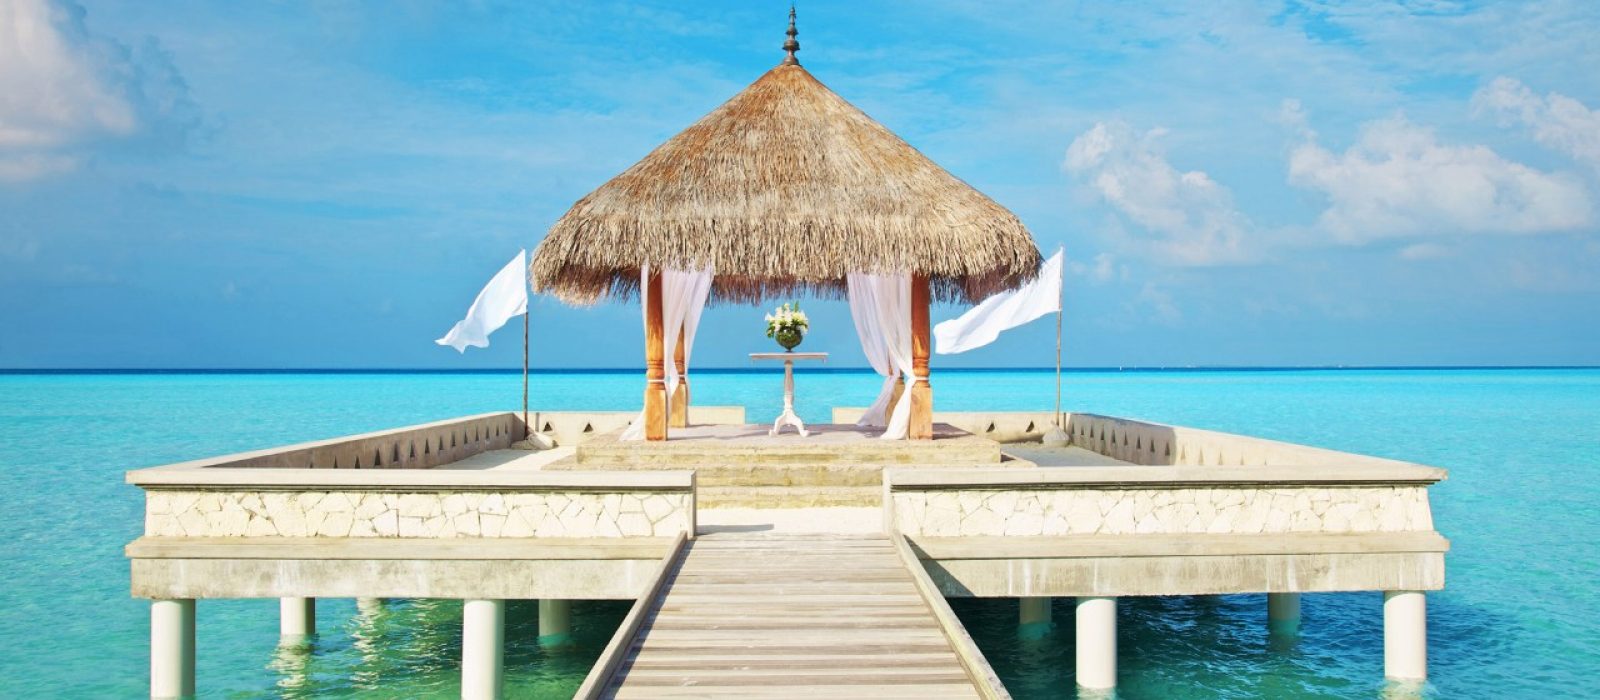 A wedding ceremony setting in a resort in Maldives